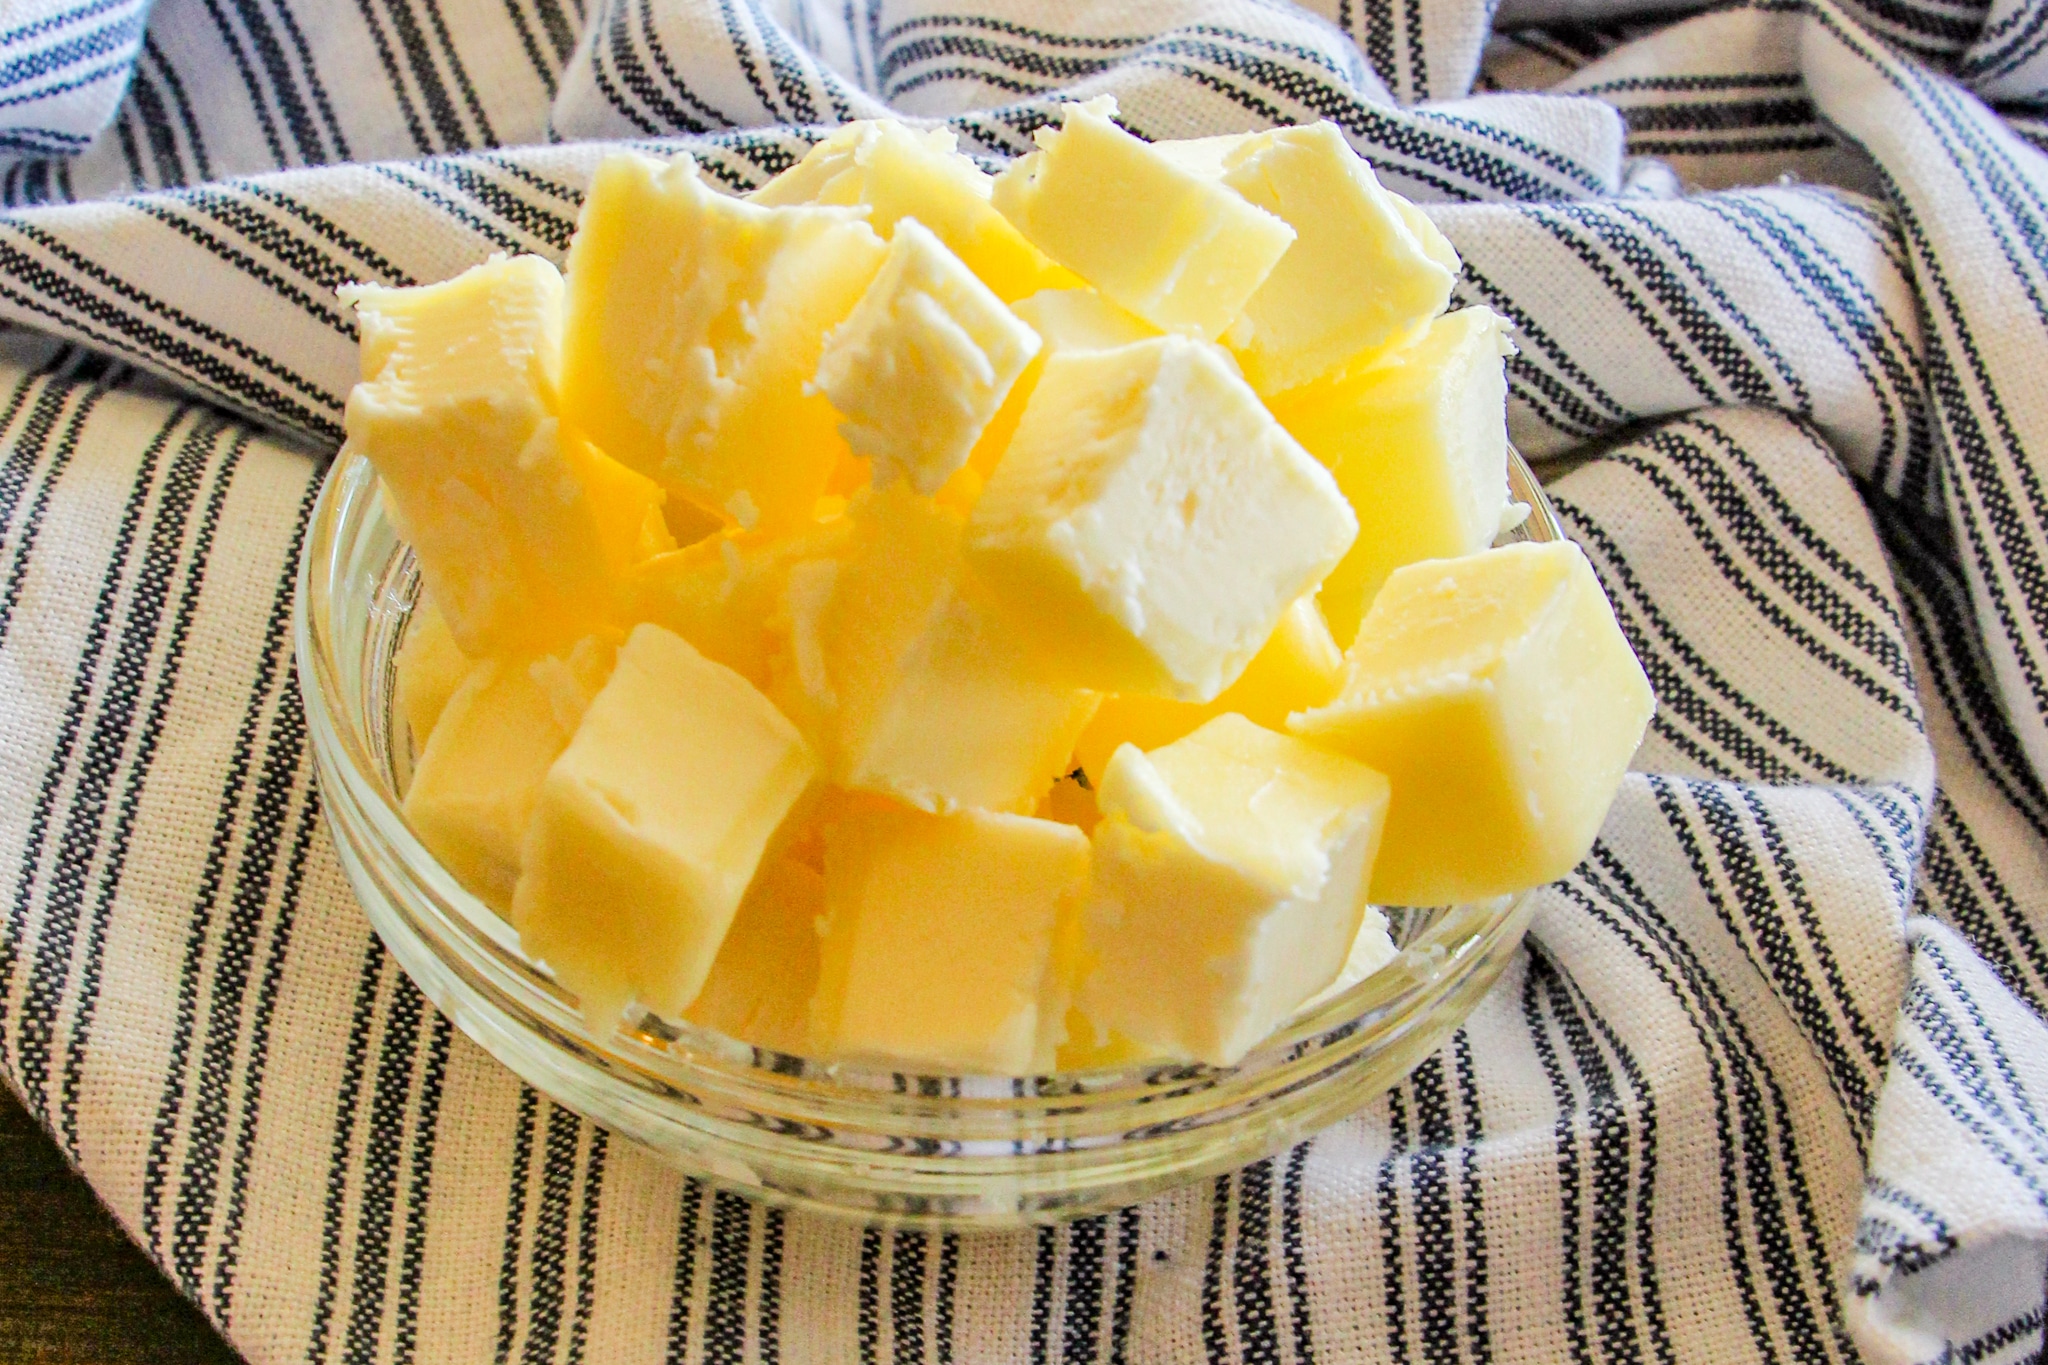 Butter in a small glass bowl cut into cubes for making Easy Drop Biscuits 